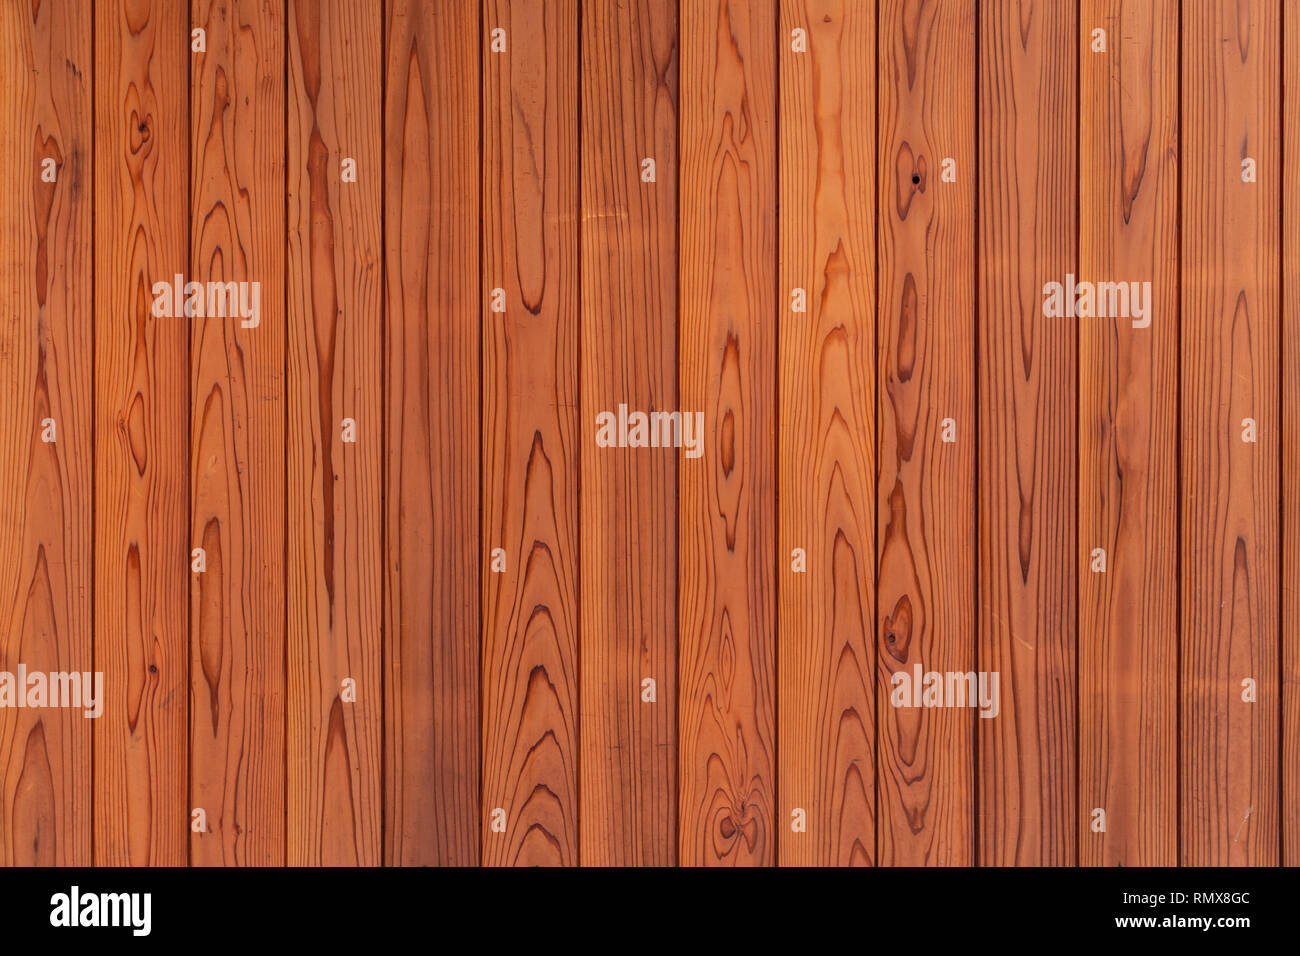 Japanese pine wood plank texture pattern for background Stock Photo